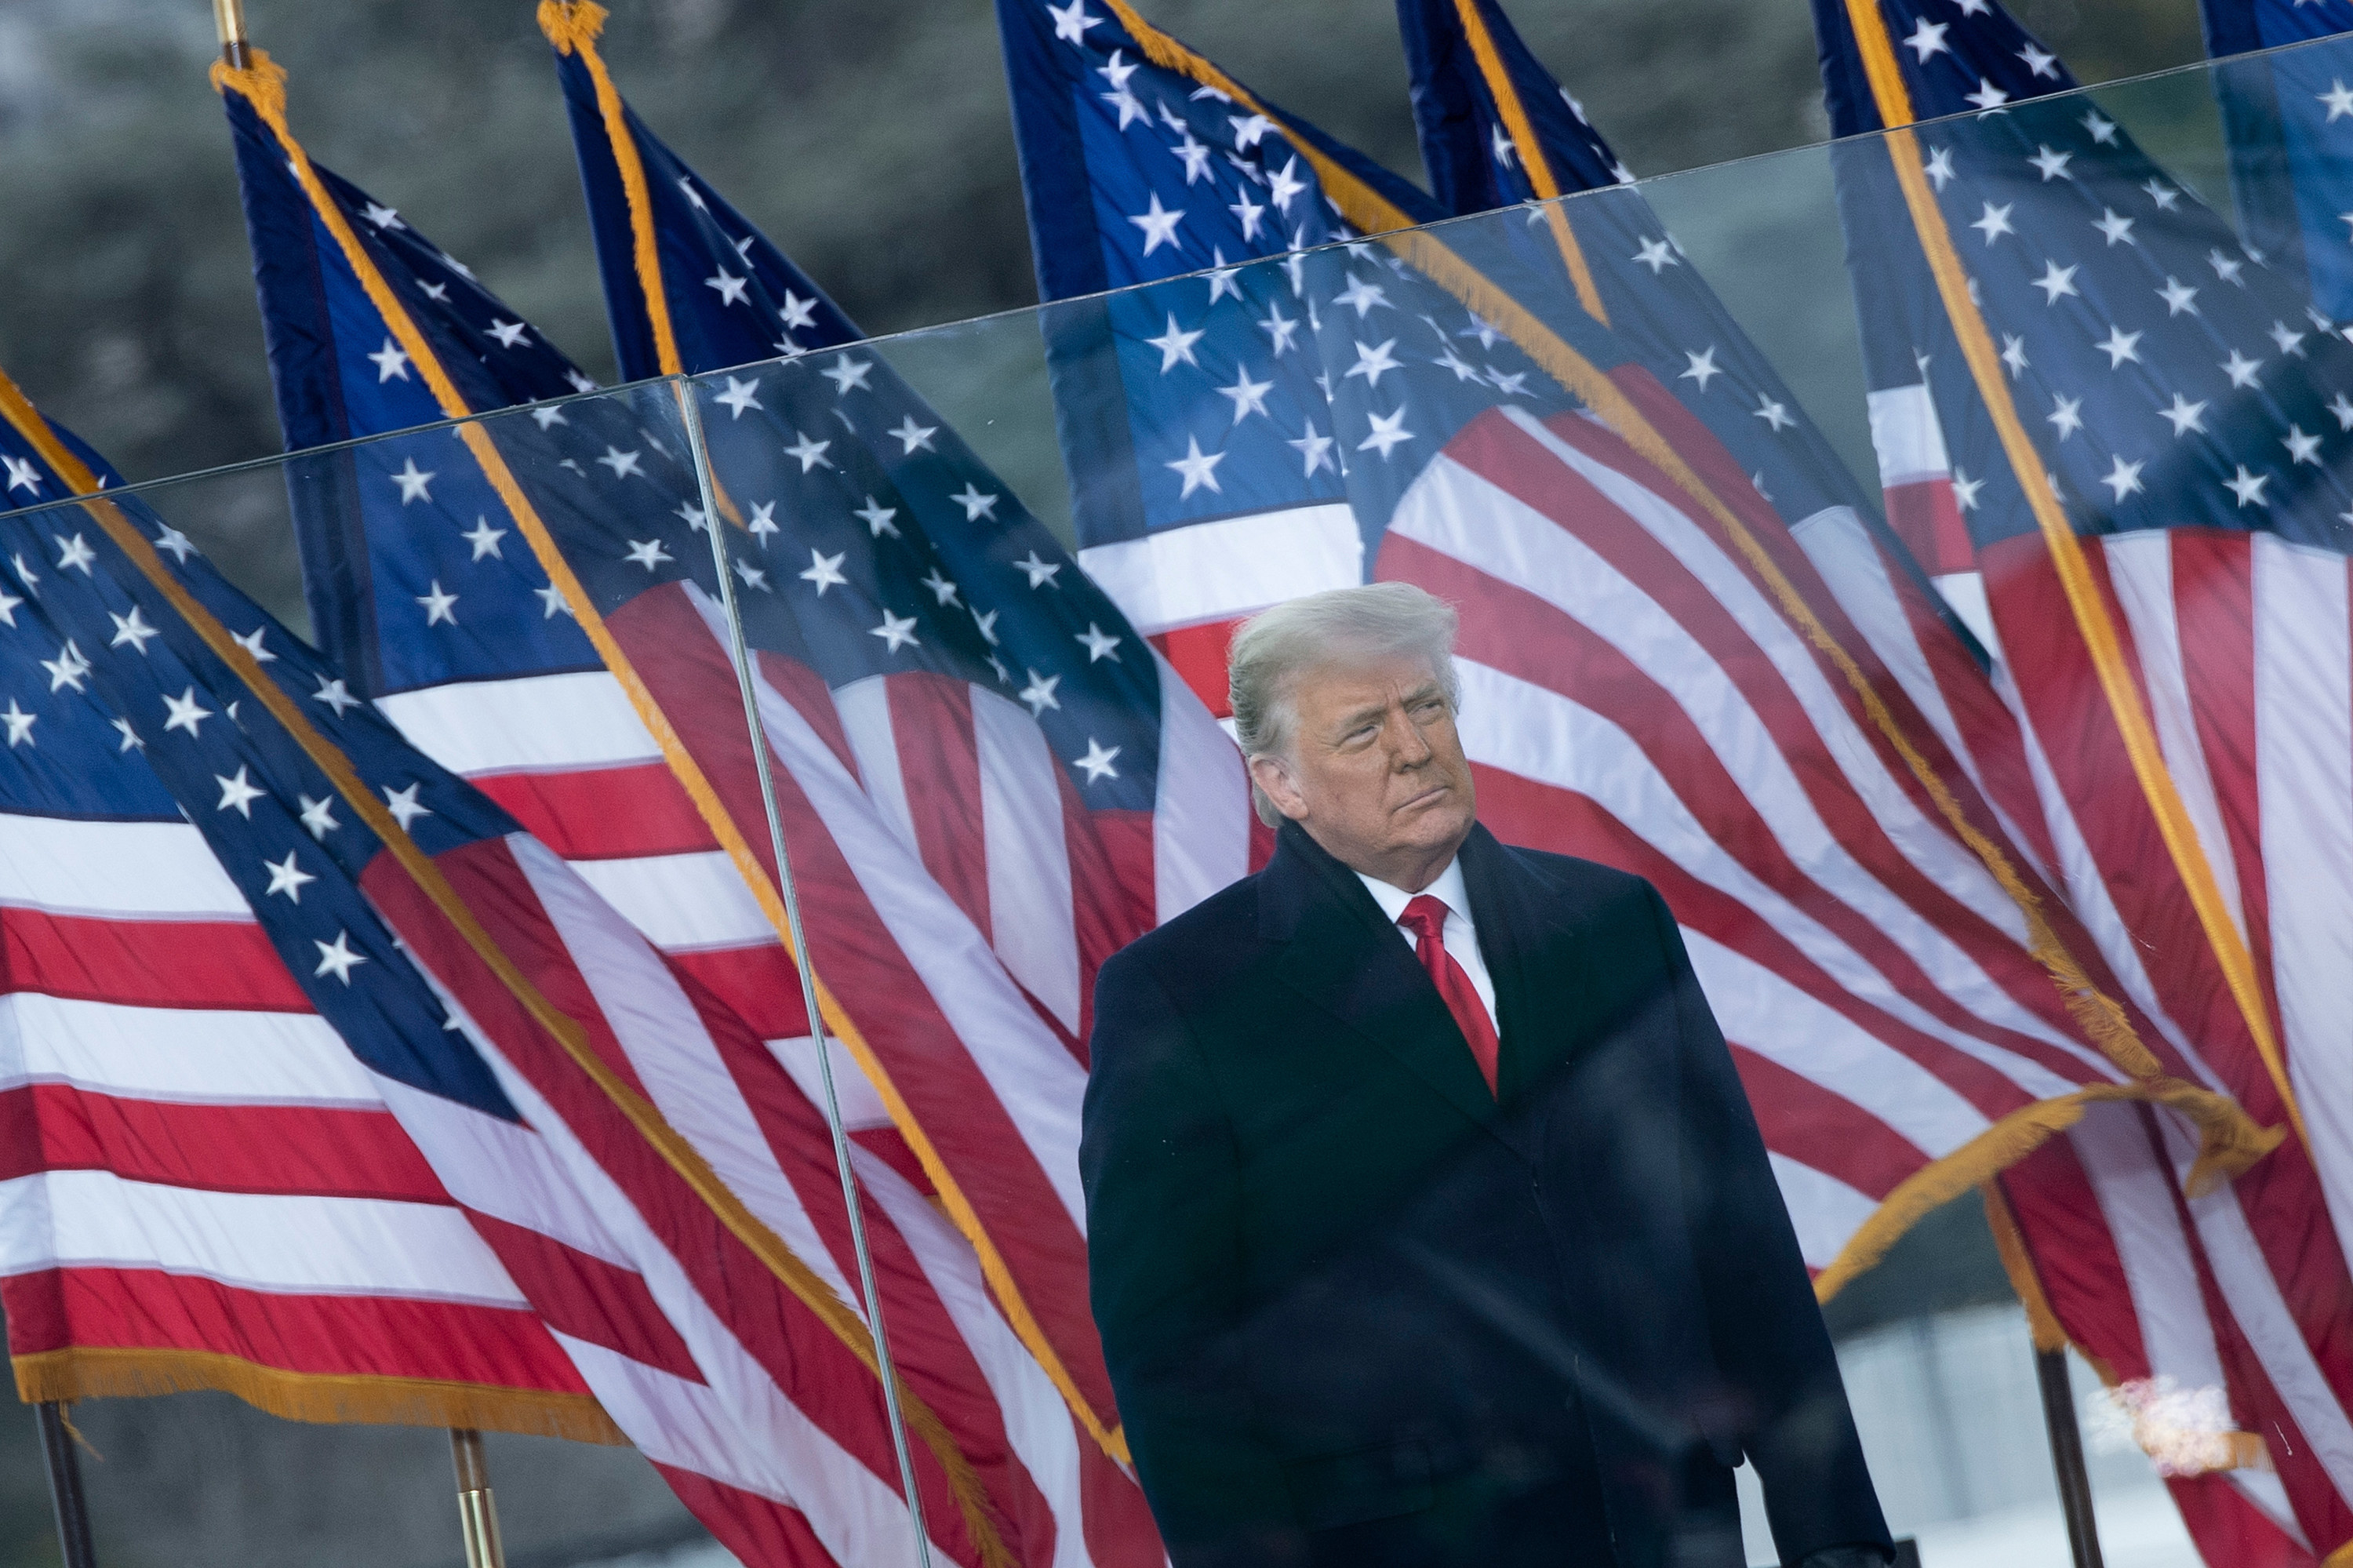 Trump wears a big jacket, red tie and stands in front of a row of six US flags behind a transparent partition